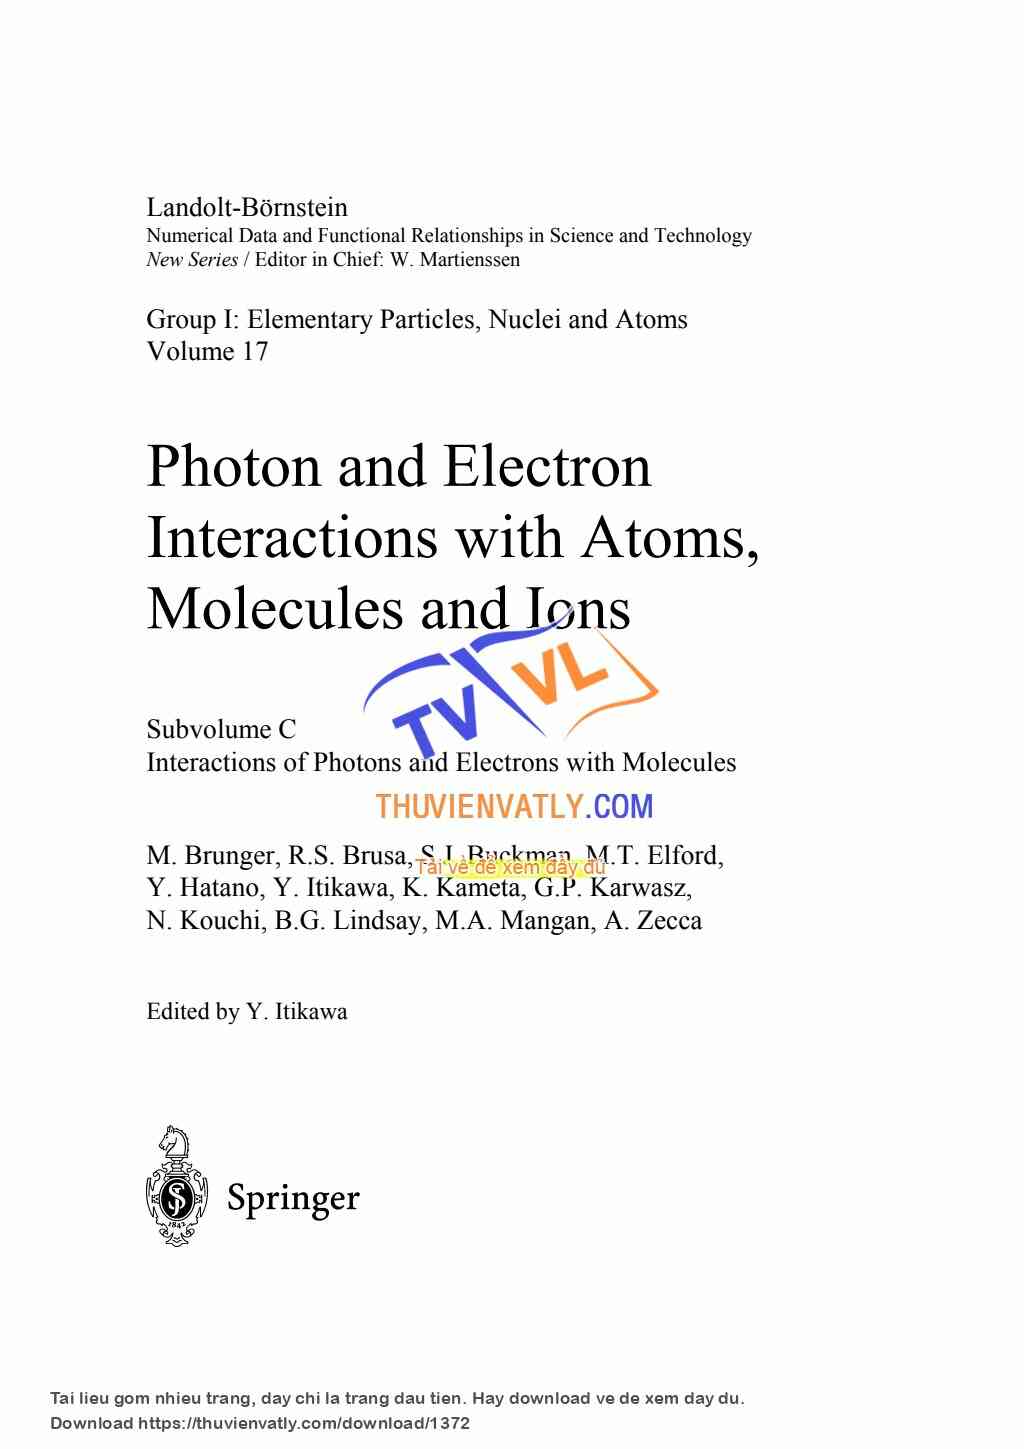 Interactions of Photons and Electrons with Molecules.pdf